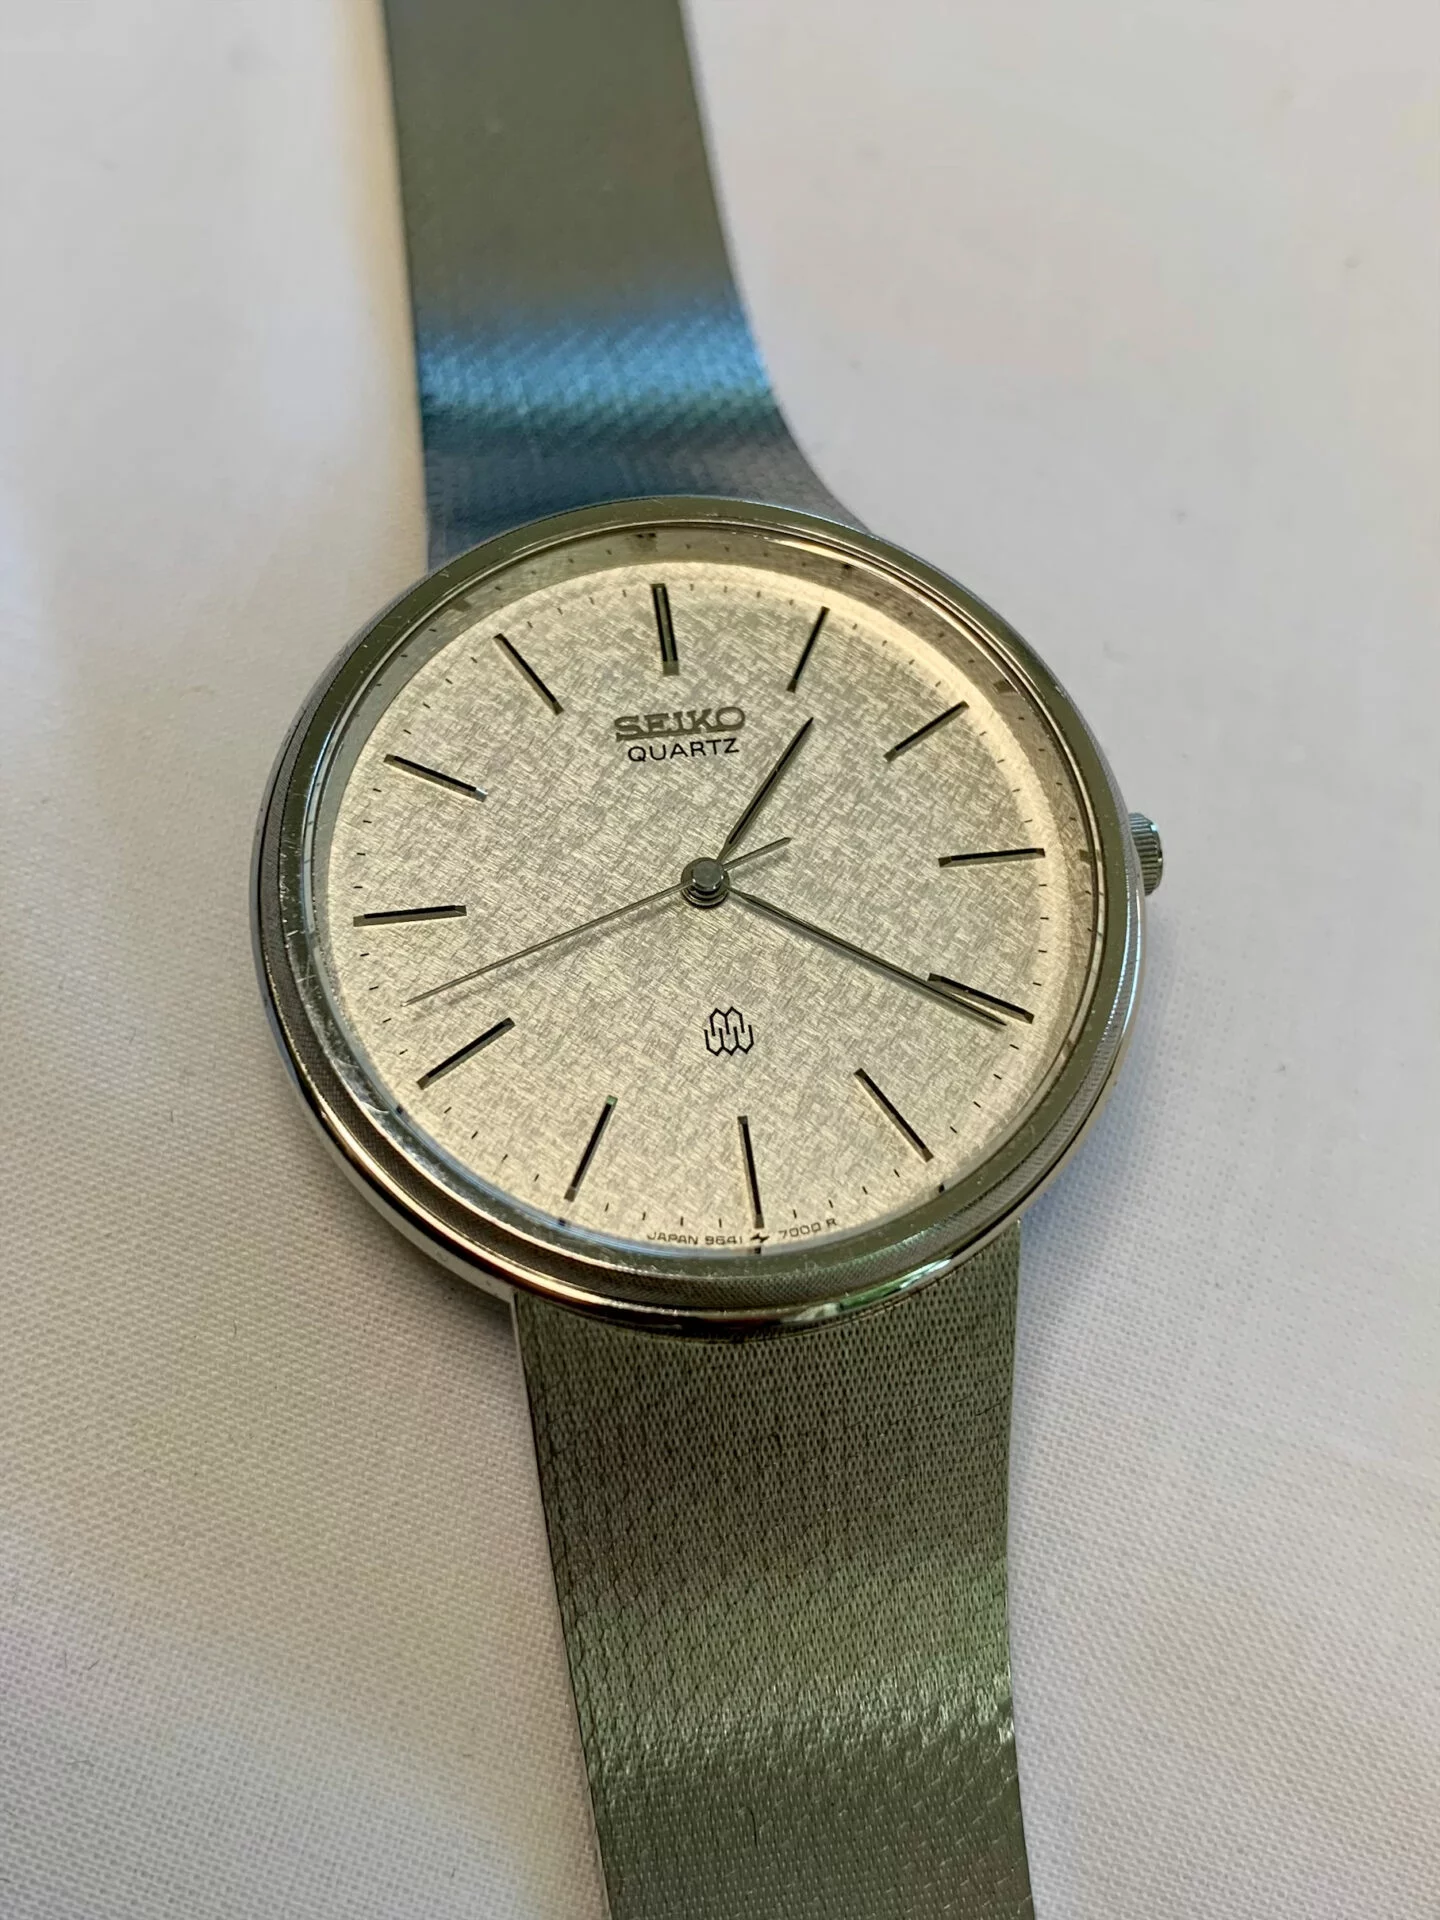 Vintage Seiko offering extraordinary accuracy that's flying under the radar